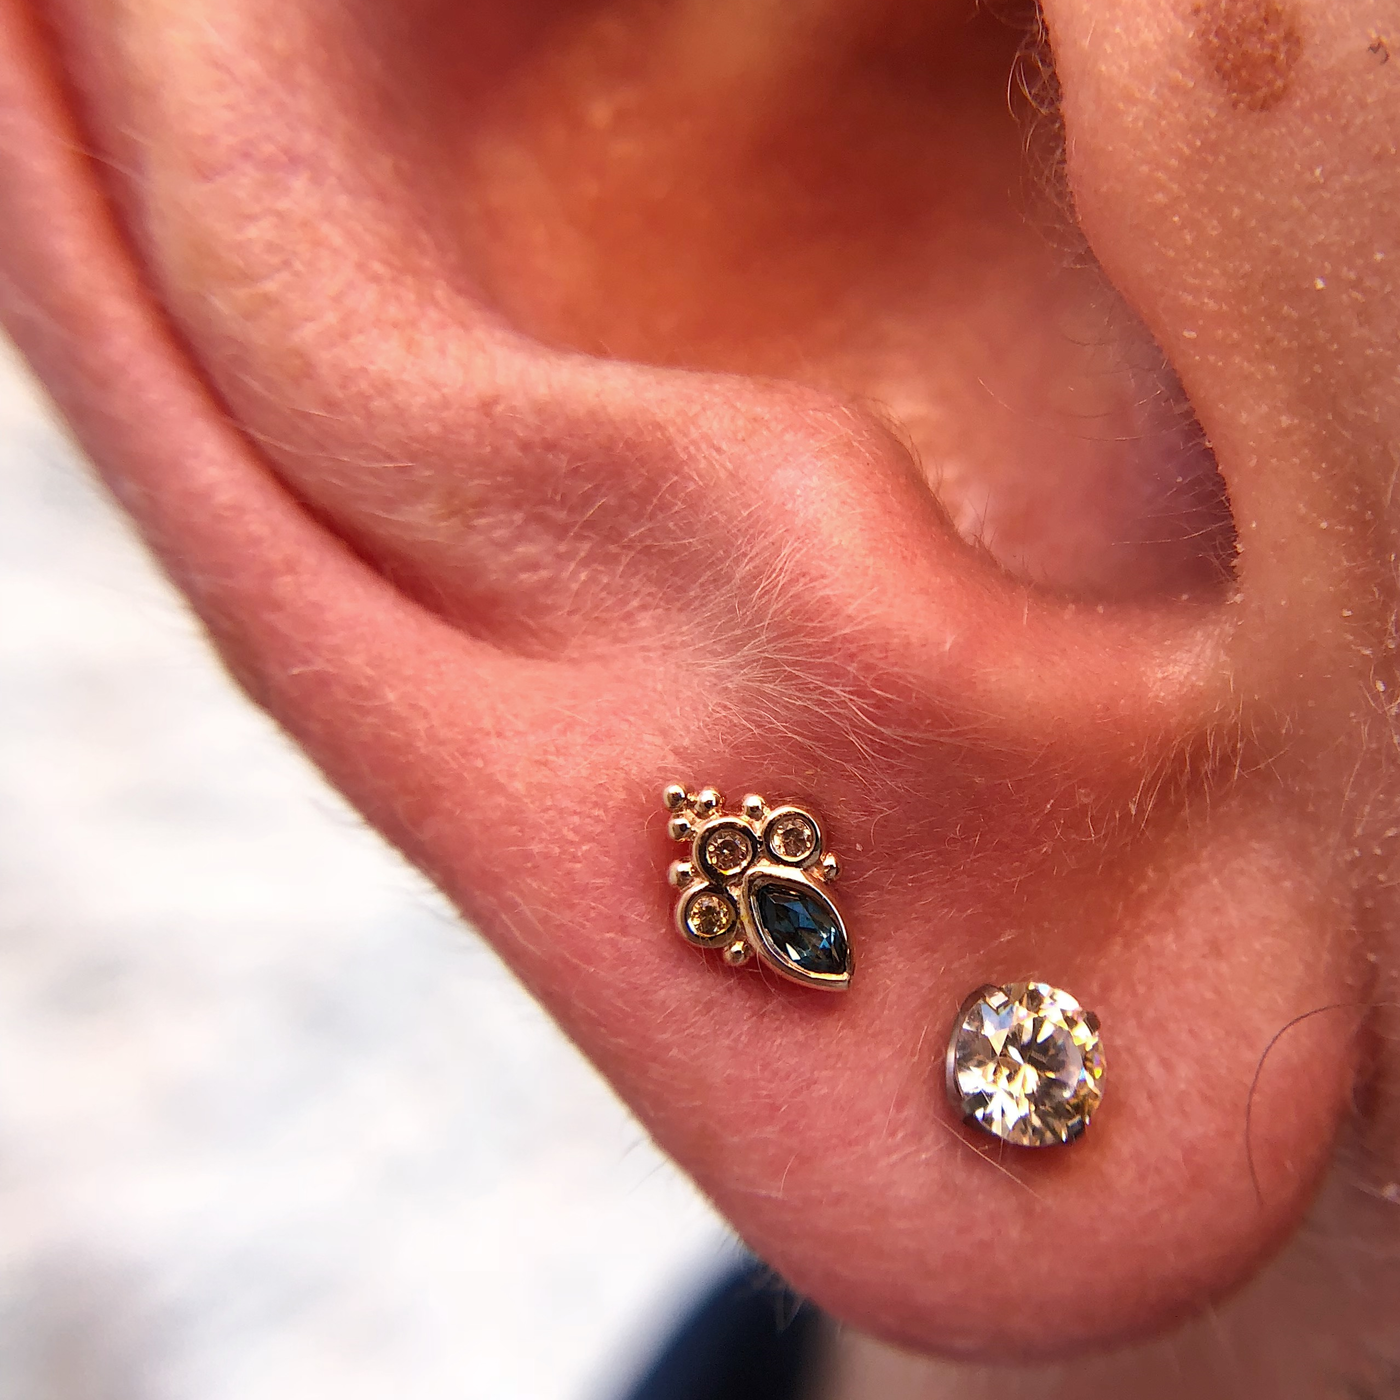 Ear Piercing Places Near Me - All You Need Infos